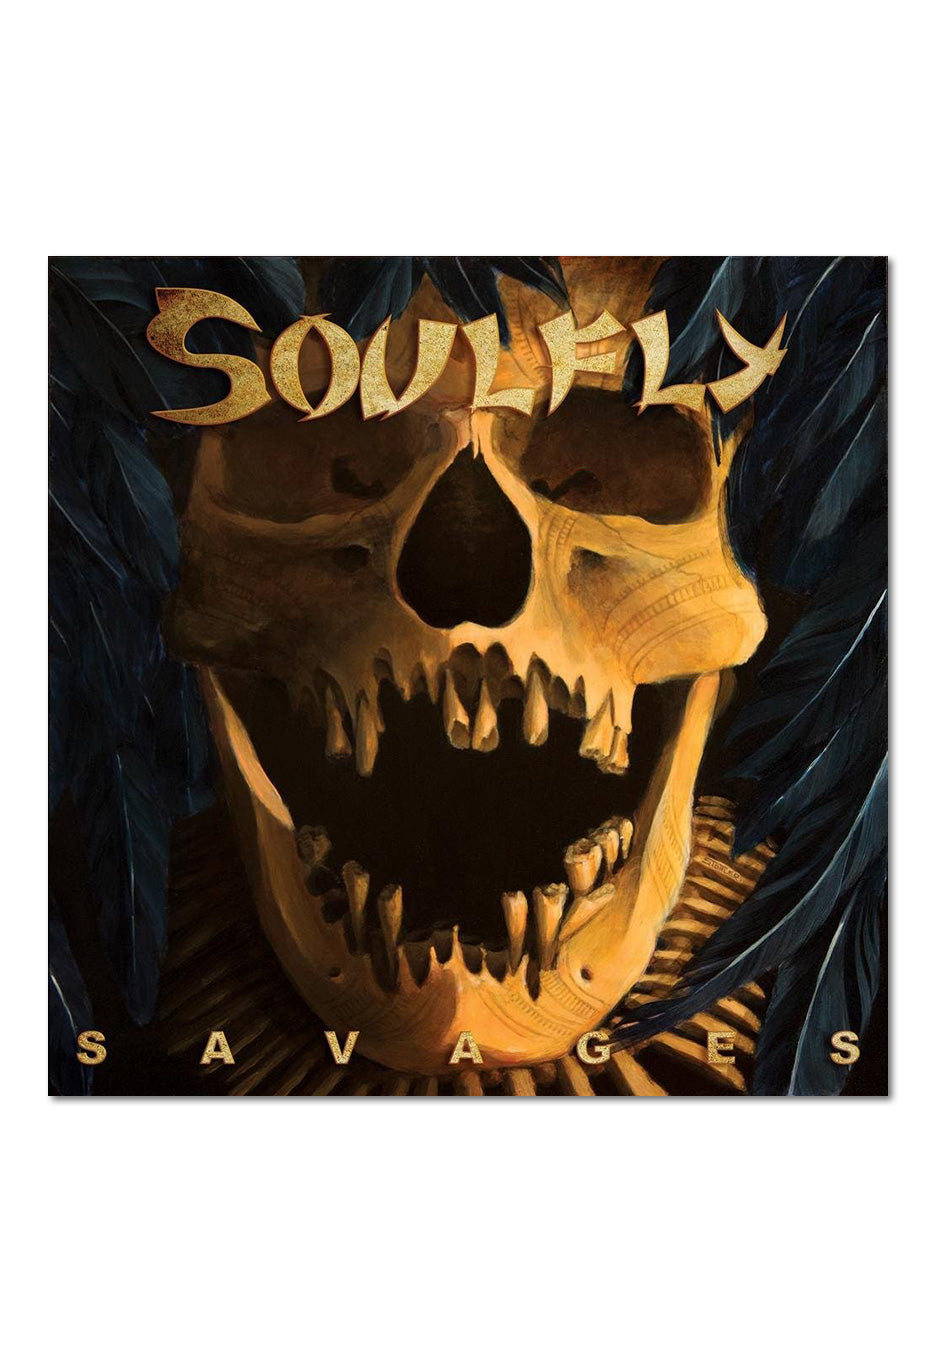 Soulfly - Savages - CD